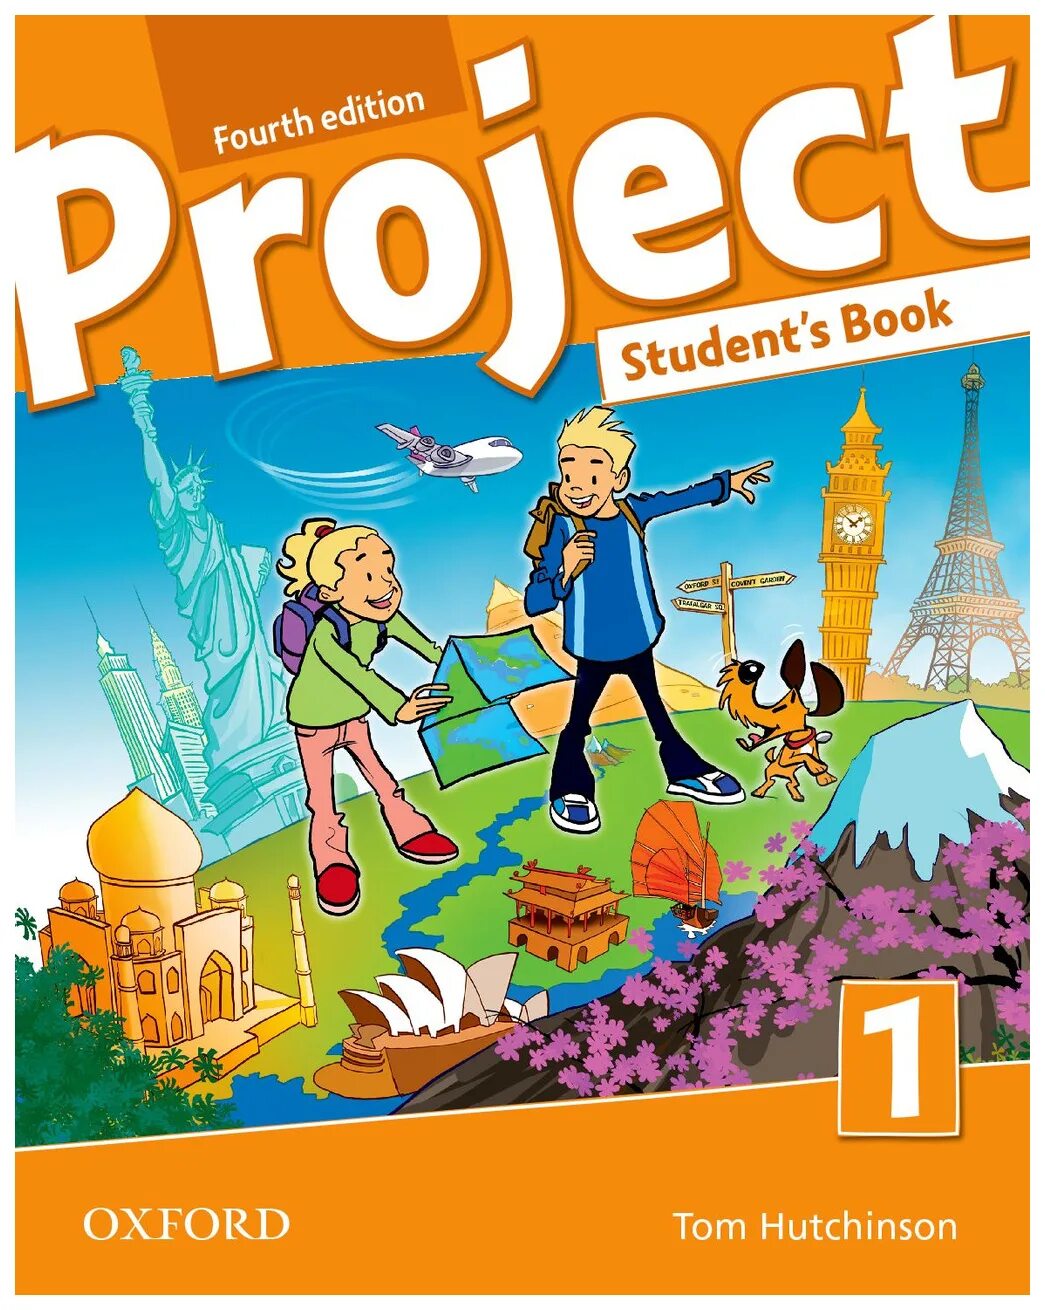 Project 1 fourth Edition students book. Project 1 4th Edition. Project student book4 fourth Edition Workbook book. Рабочая тетрадь Project 1 Oxford Tom Hutchinson. Student s book купить